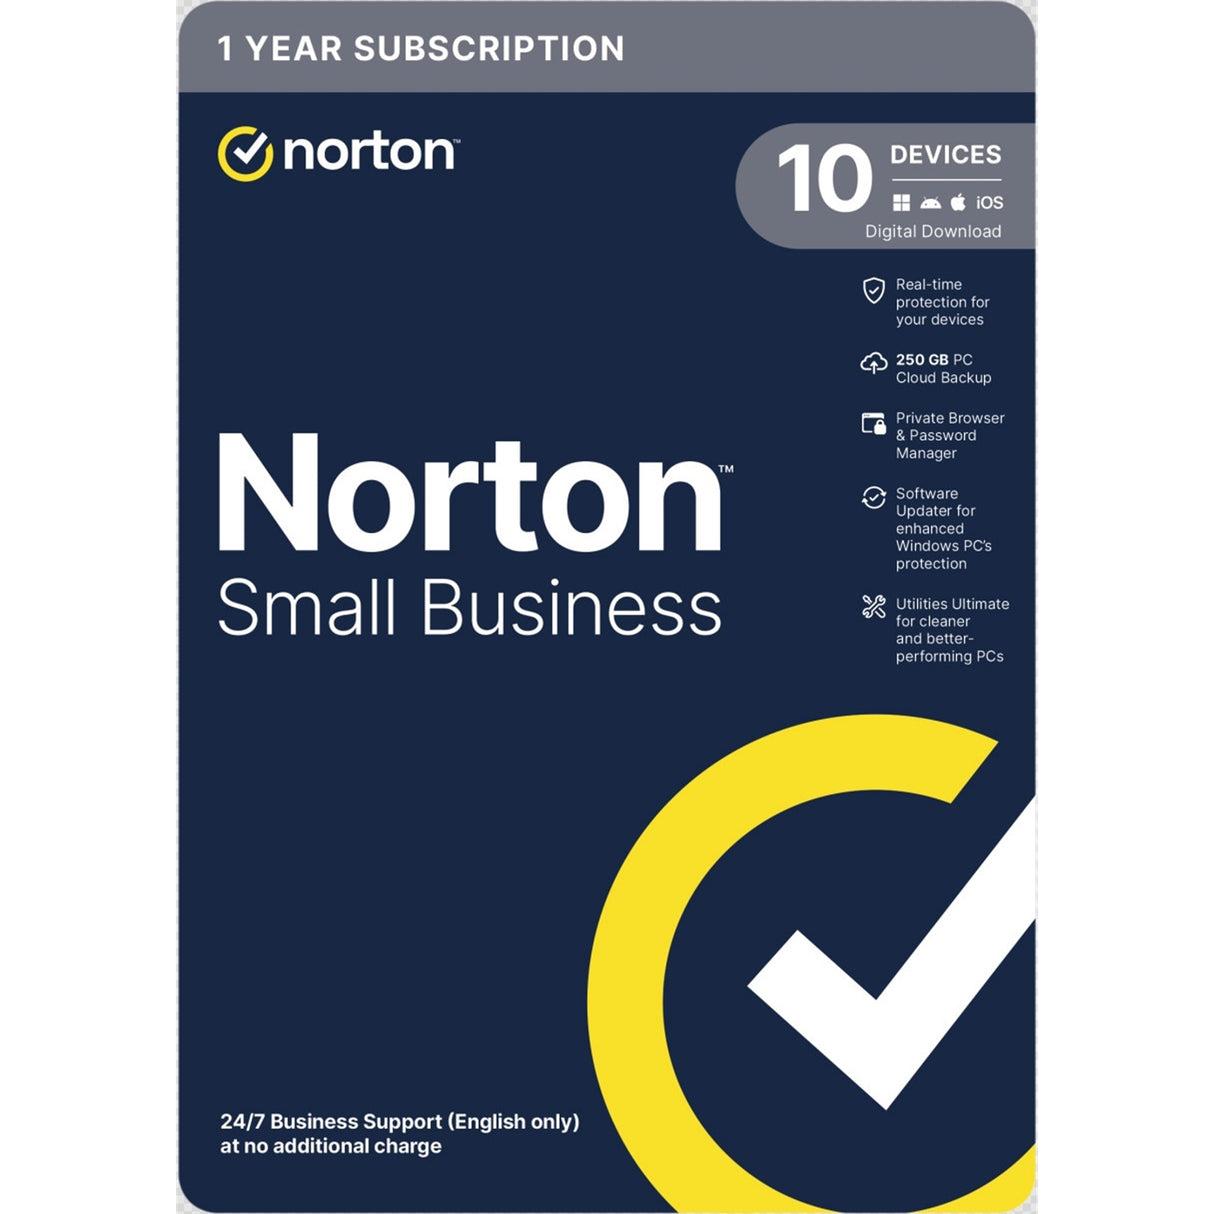 Norton Small Business, Antivirus Software, 10 Devices, 1-year Subscription, Includes 250GB of Cloud Storage, Dark Web Monitoring, Private Browser, 24/7 Business Support, Activation Code by email - ESD